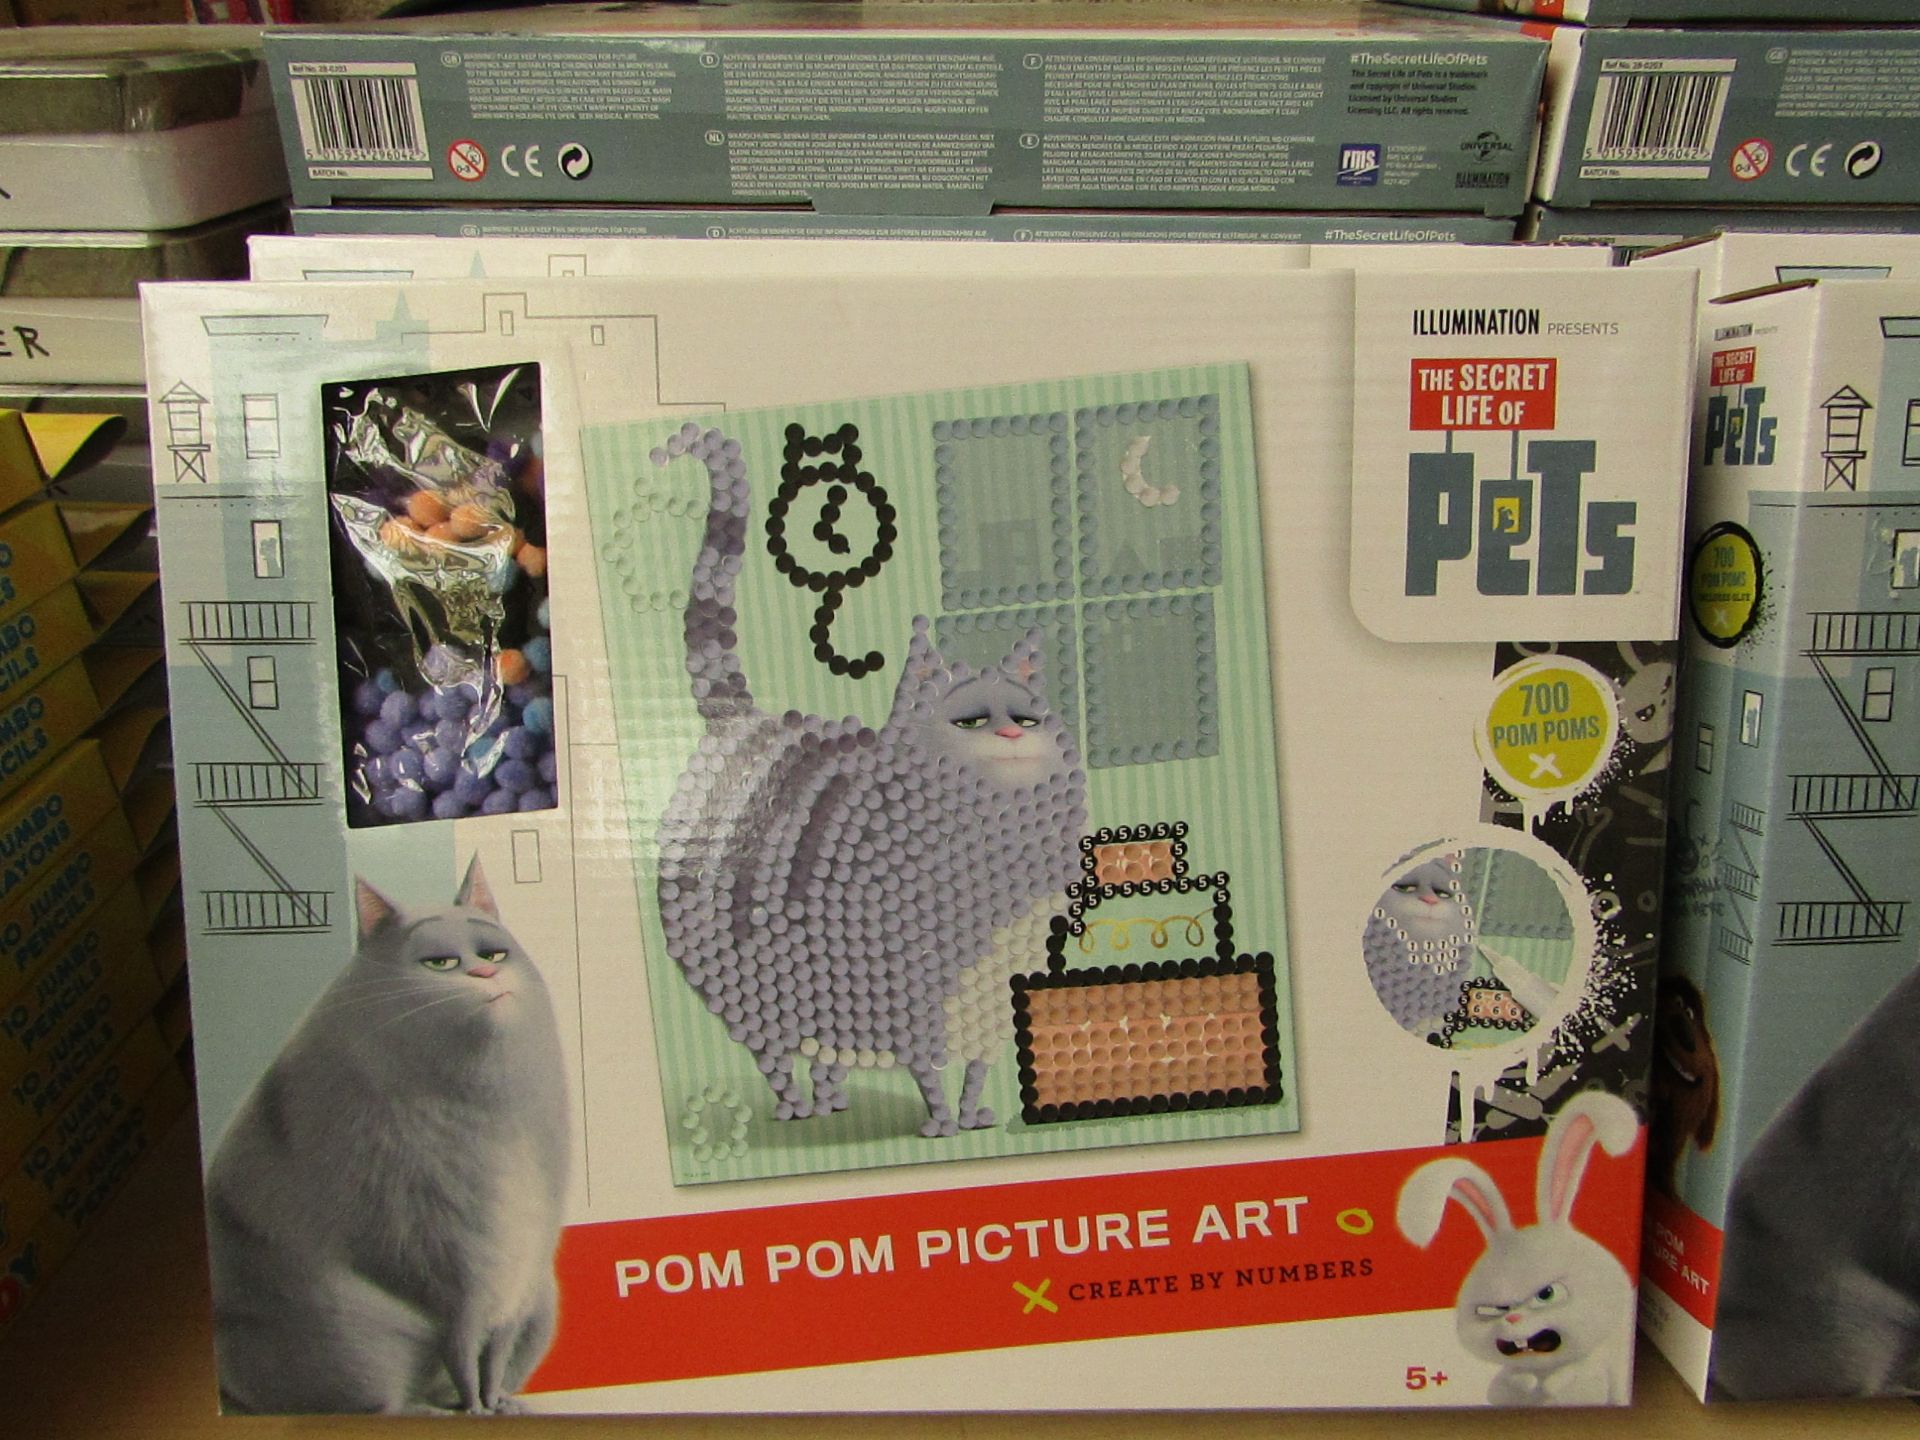 2x The Secret Life of Pets Pom Pom picture art, both new and boxed.